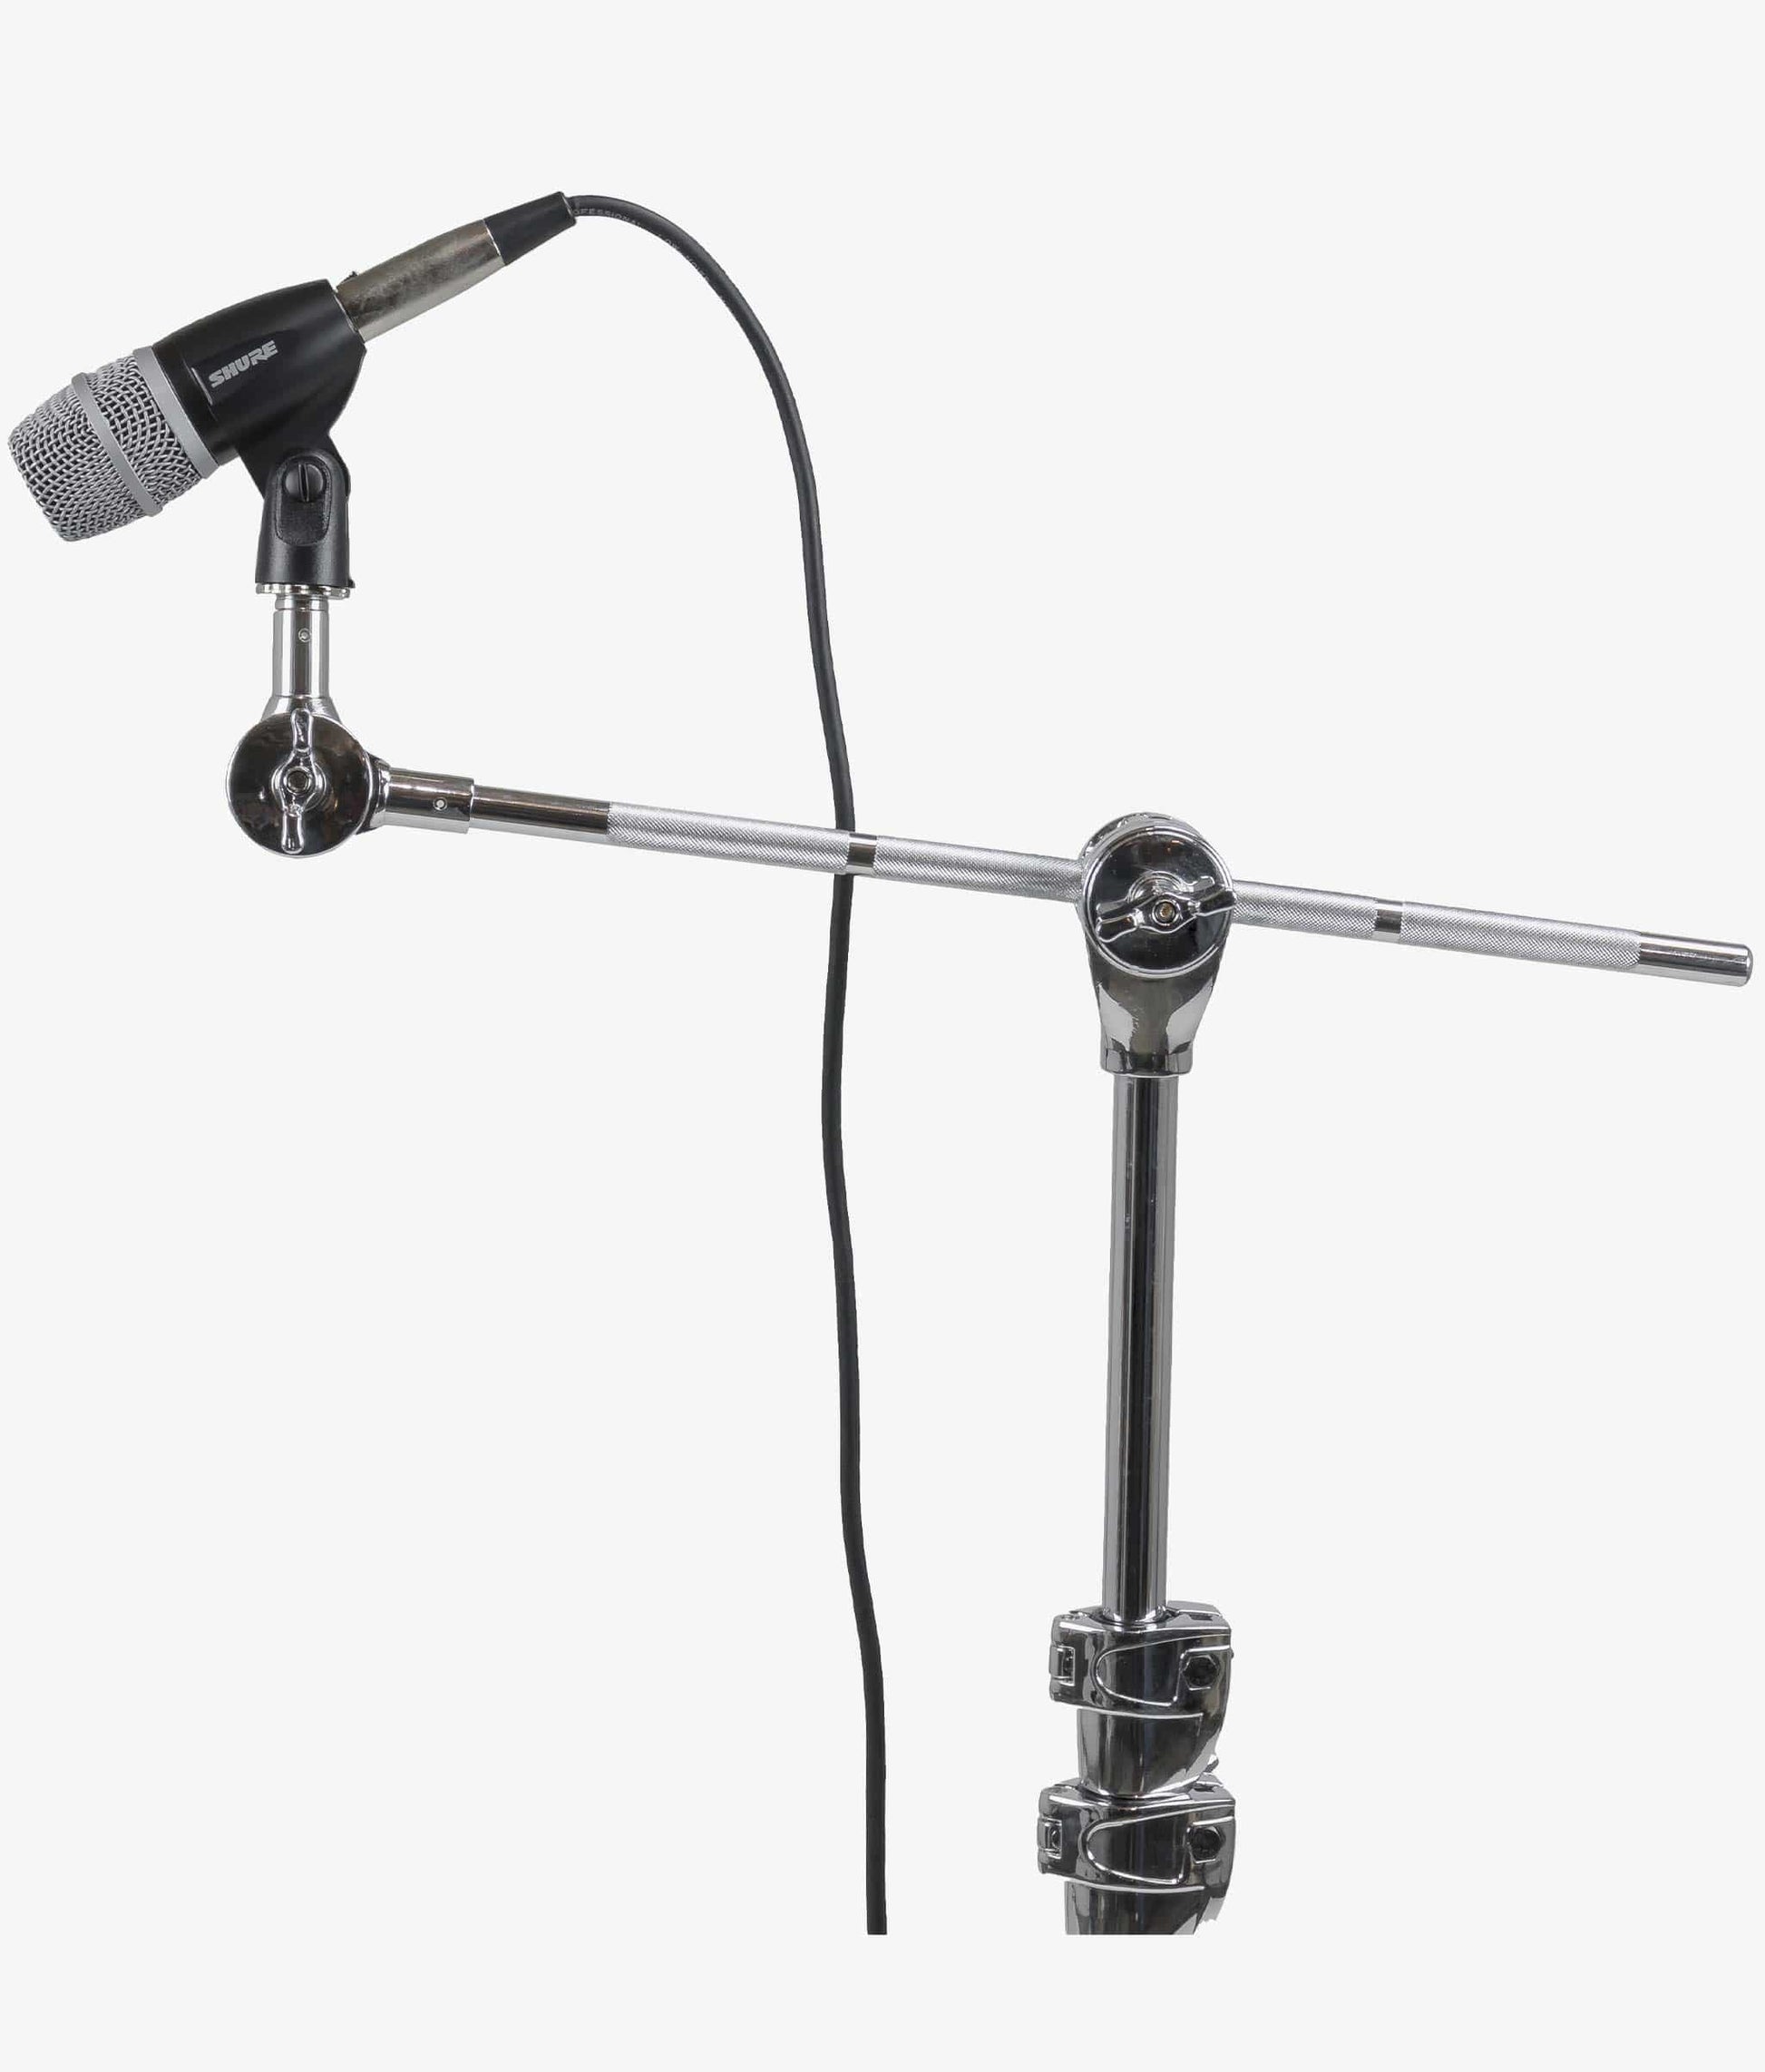  Gibraltar SC-BAMML 16" Microphone Boom Arm and Clamp microphone boom arm